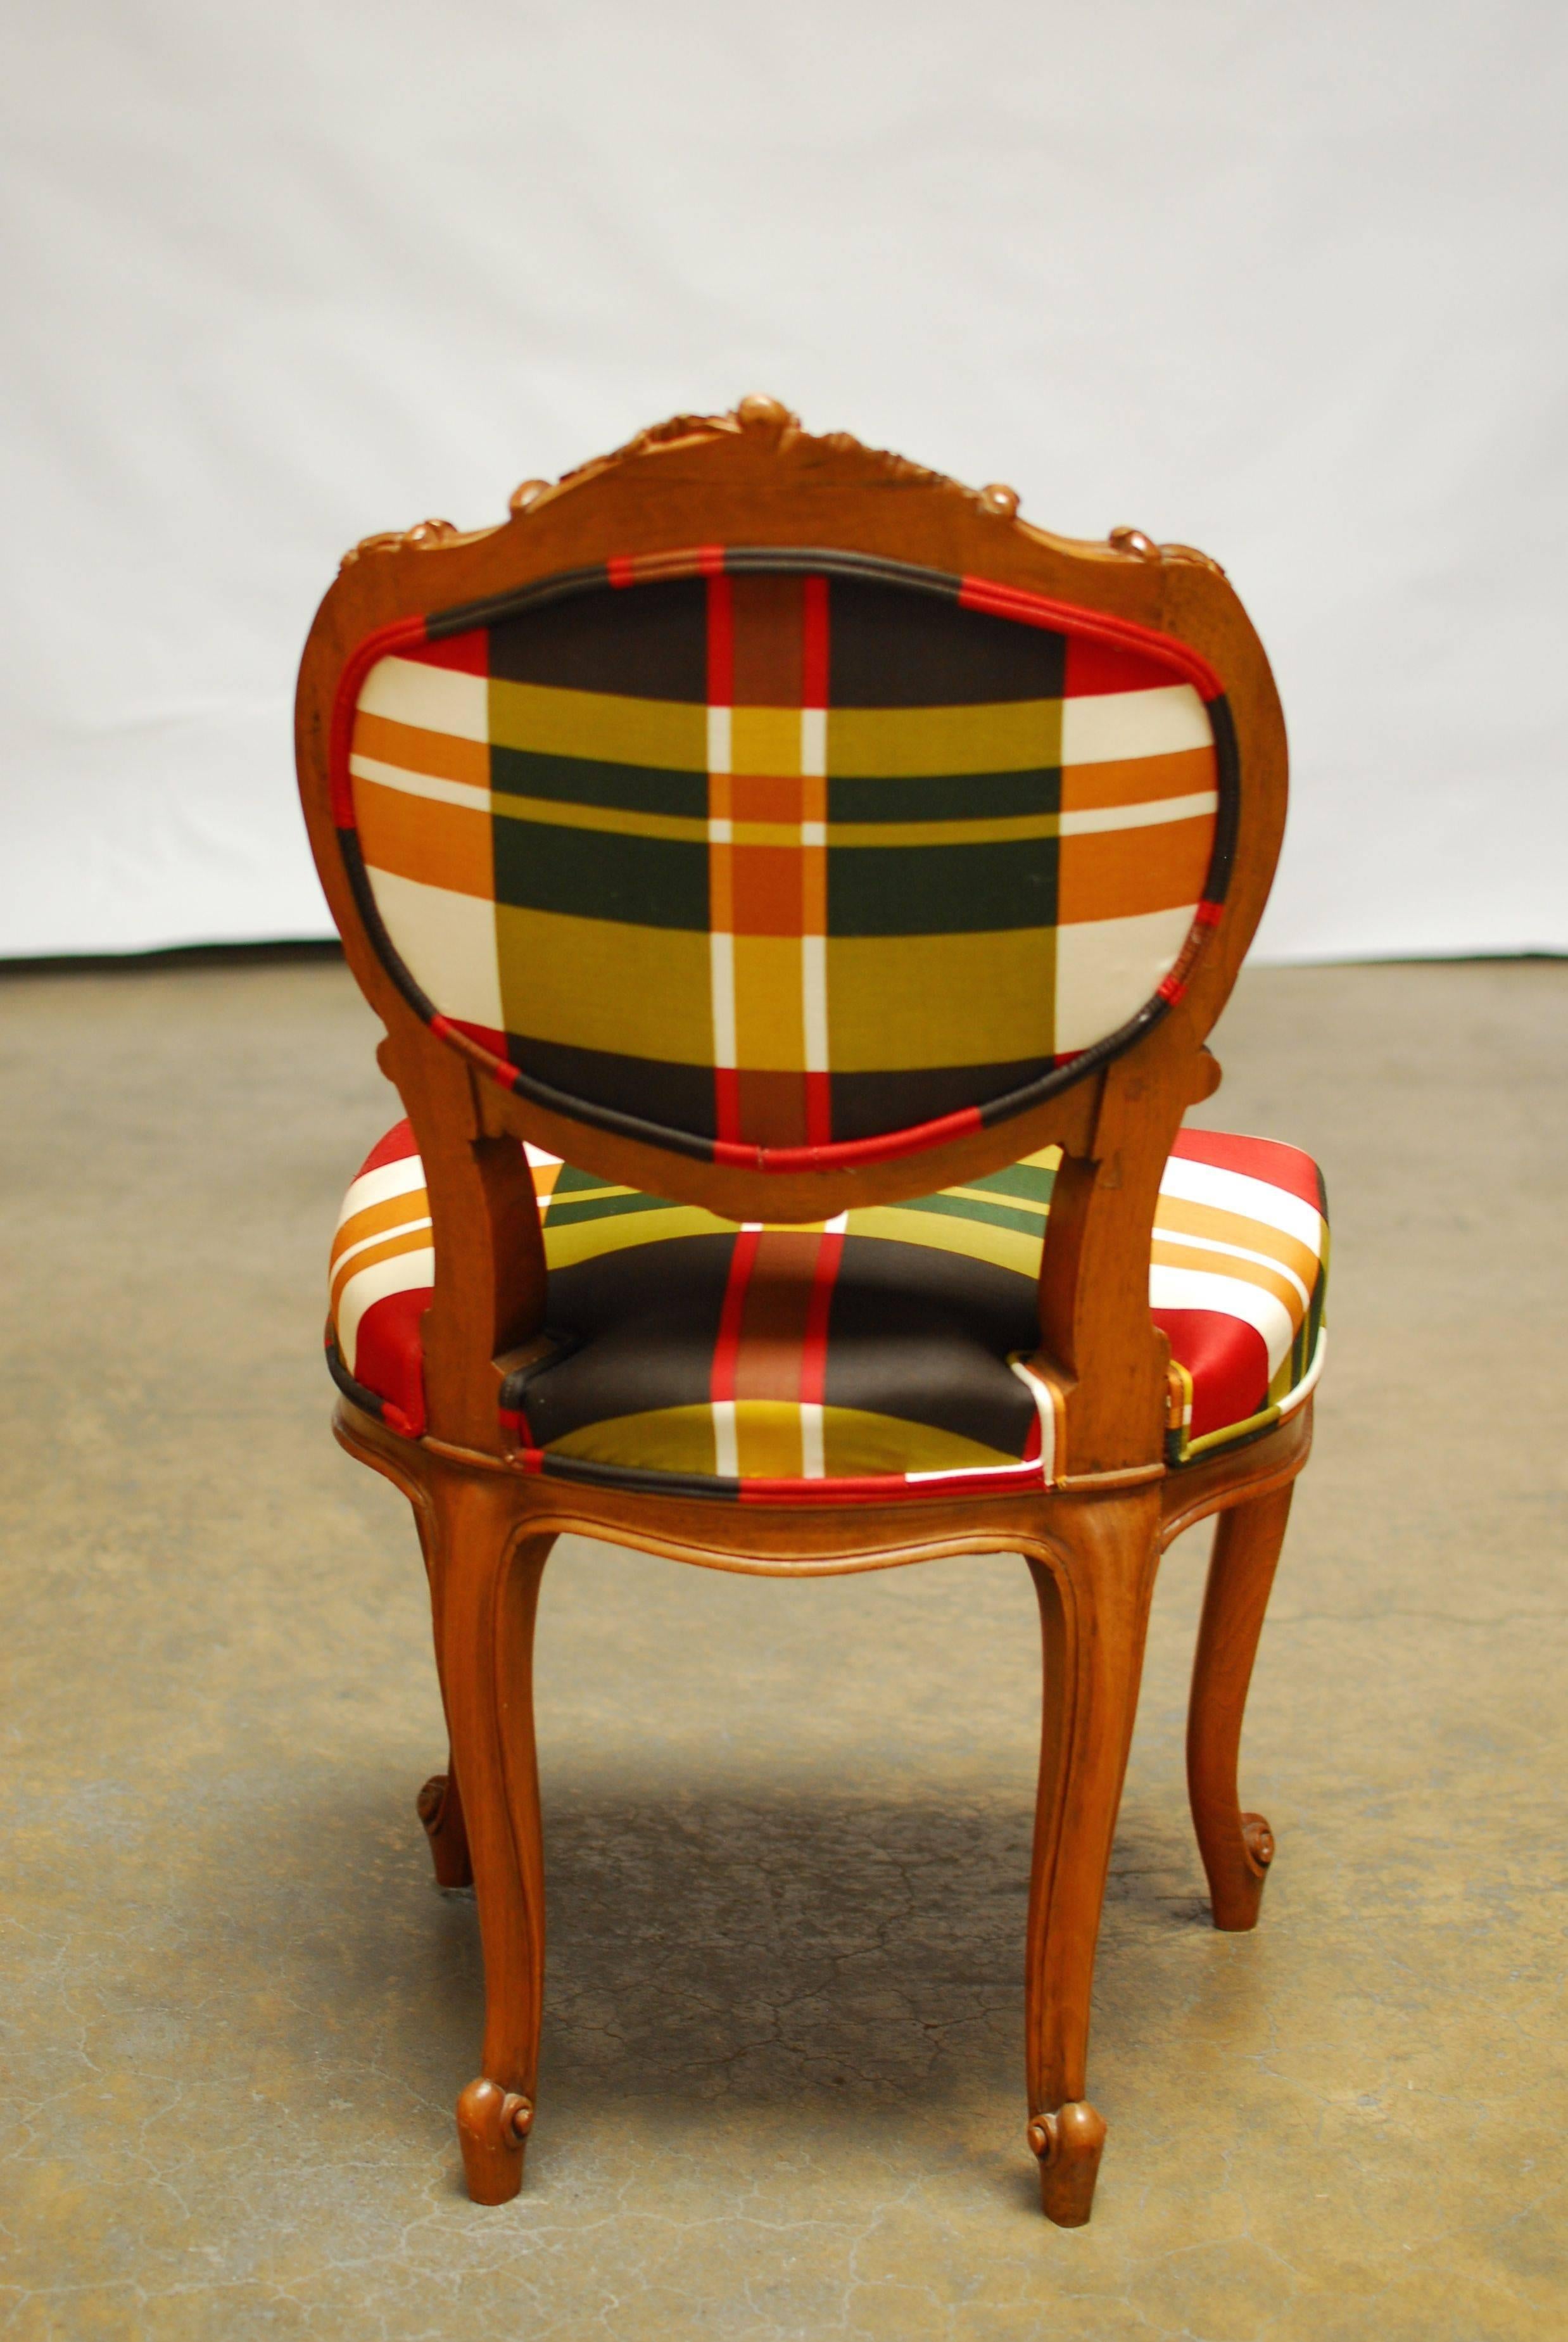 Pair of chic 19th century French Louis XV style chairs with a hand-carved walnut frame and cabriole legs. Featuring a Burberry style silk plaid upholstery with a double welt on the seat and back. Classic floral and foliate carved details on the